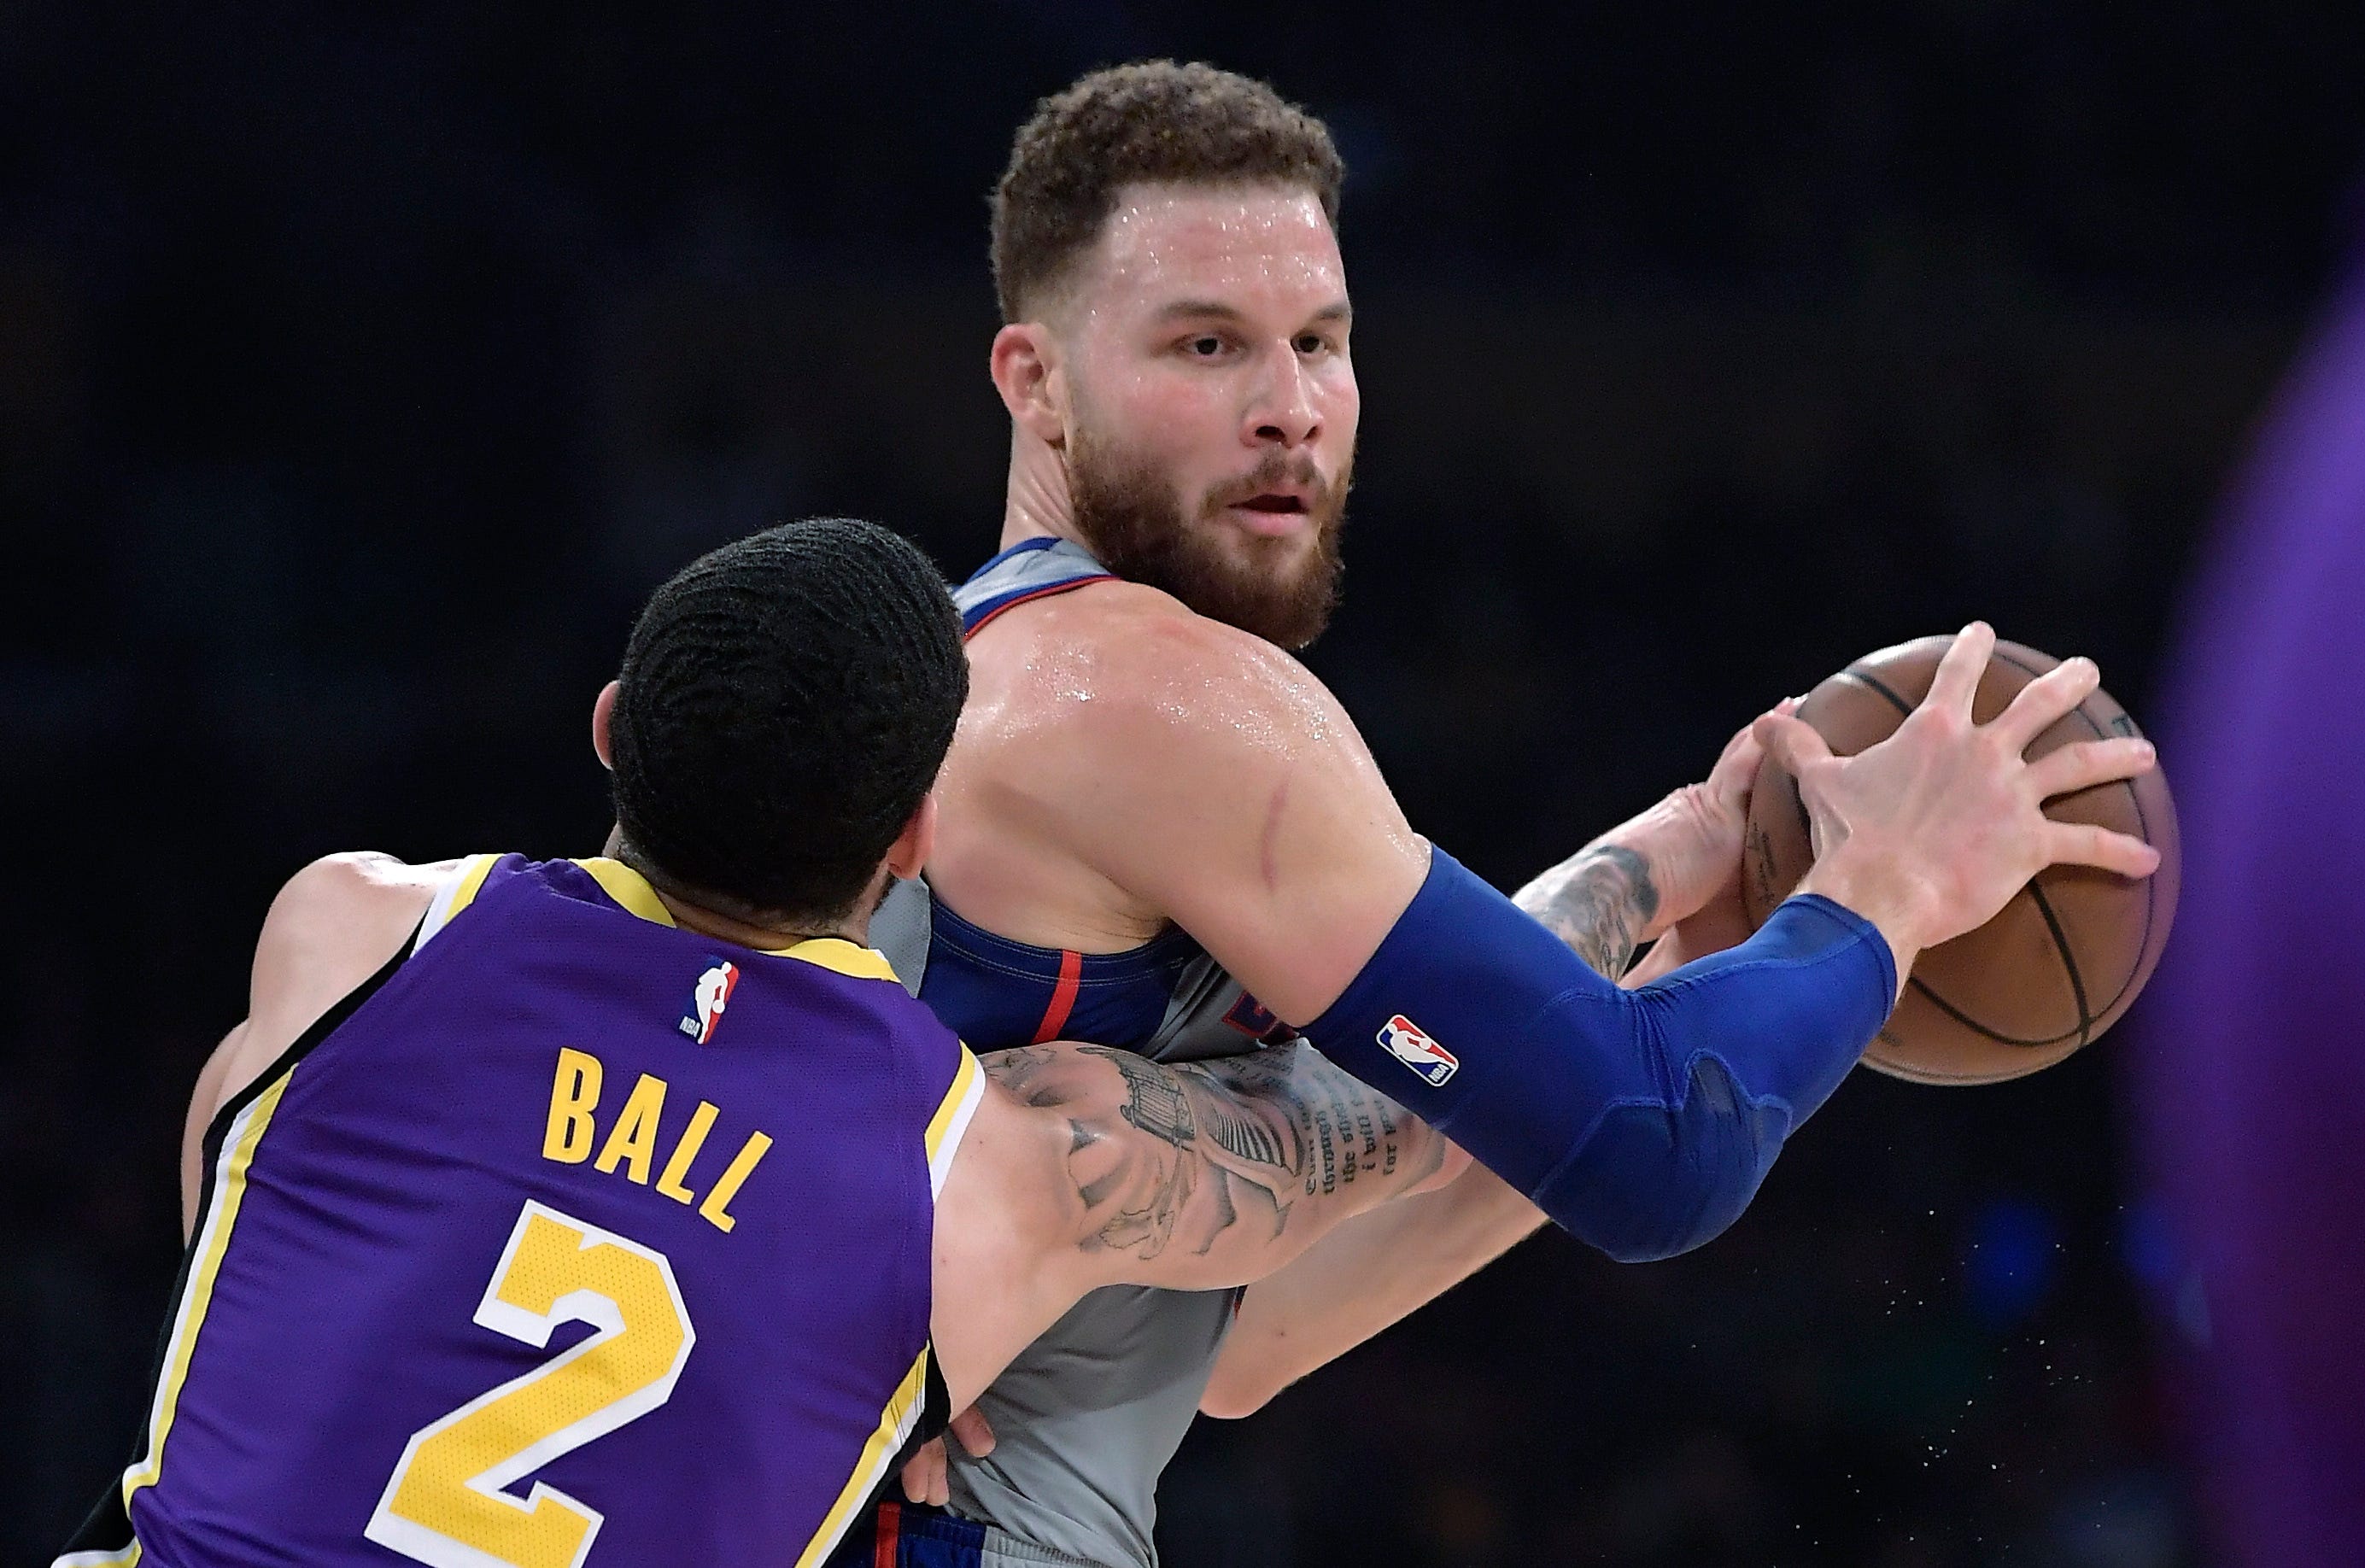 Los Angeles Lakers guard Lonzo Ball, left, reaches for the ball held by Detroit Pistons forward Blake Griffin during the first half.